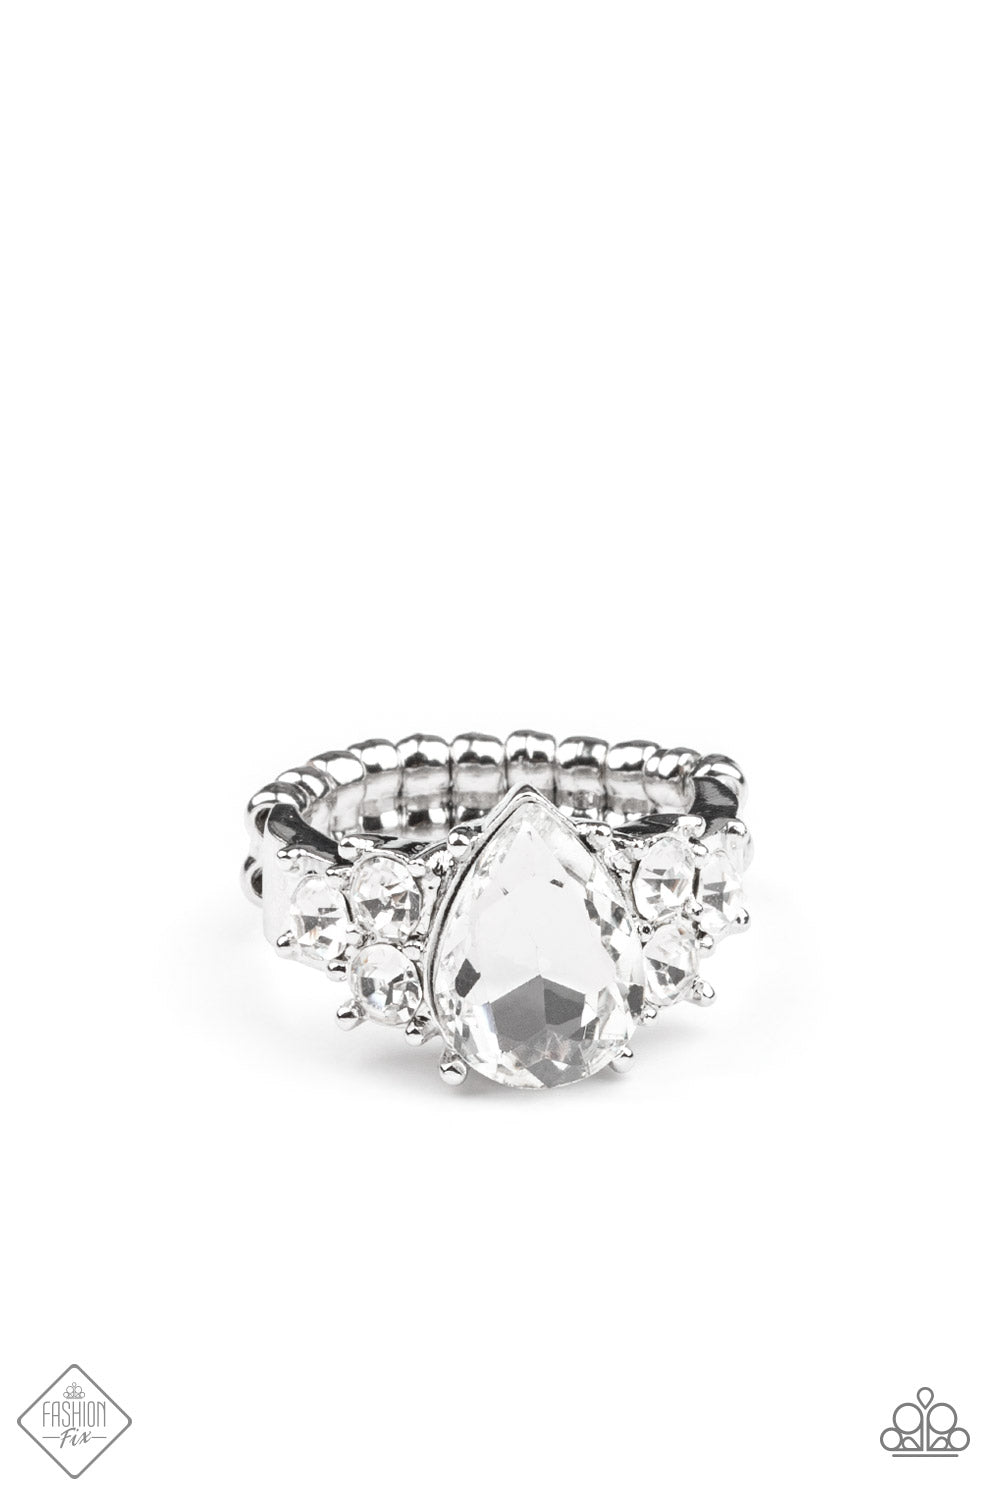 Paparazzi Happily Ever Eloquent Rings